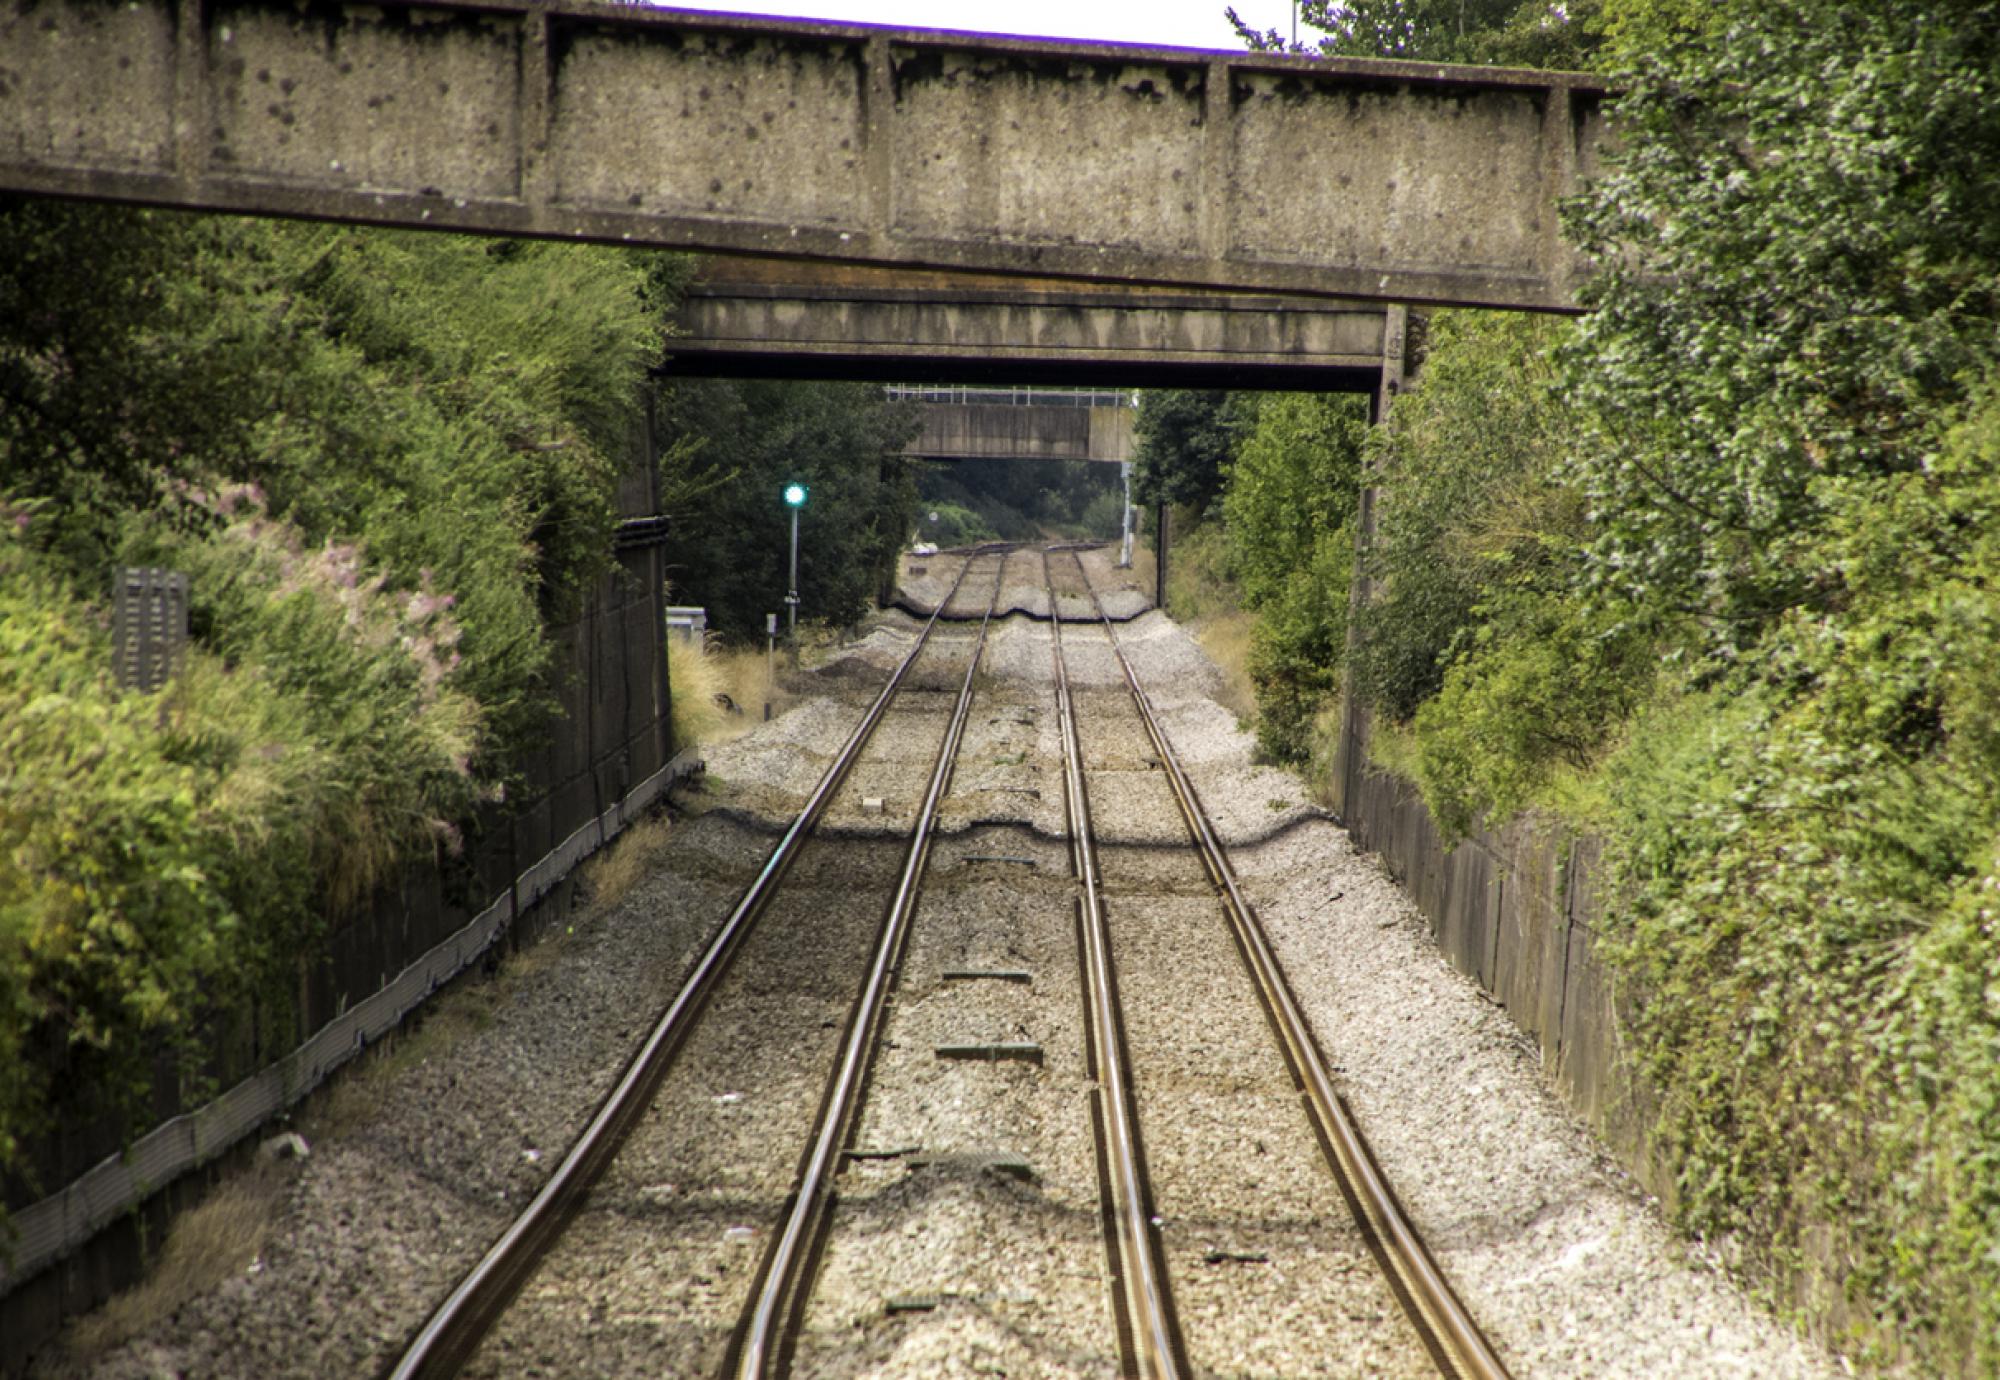 Dry rail track on a hot day, via Istock